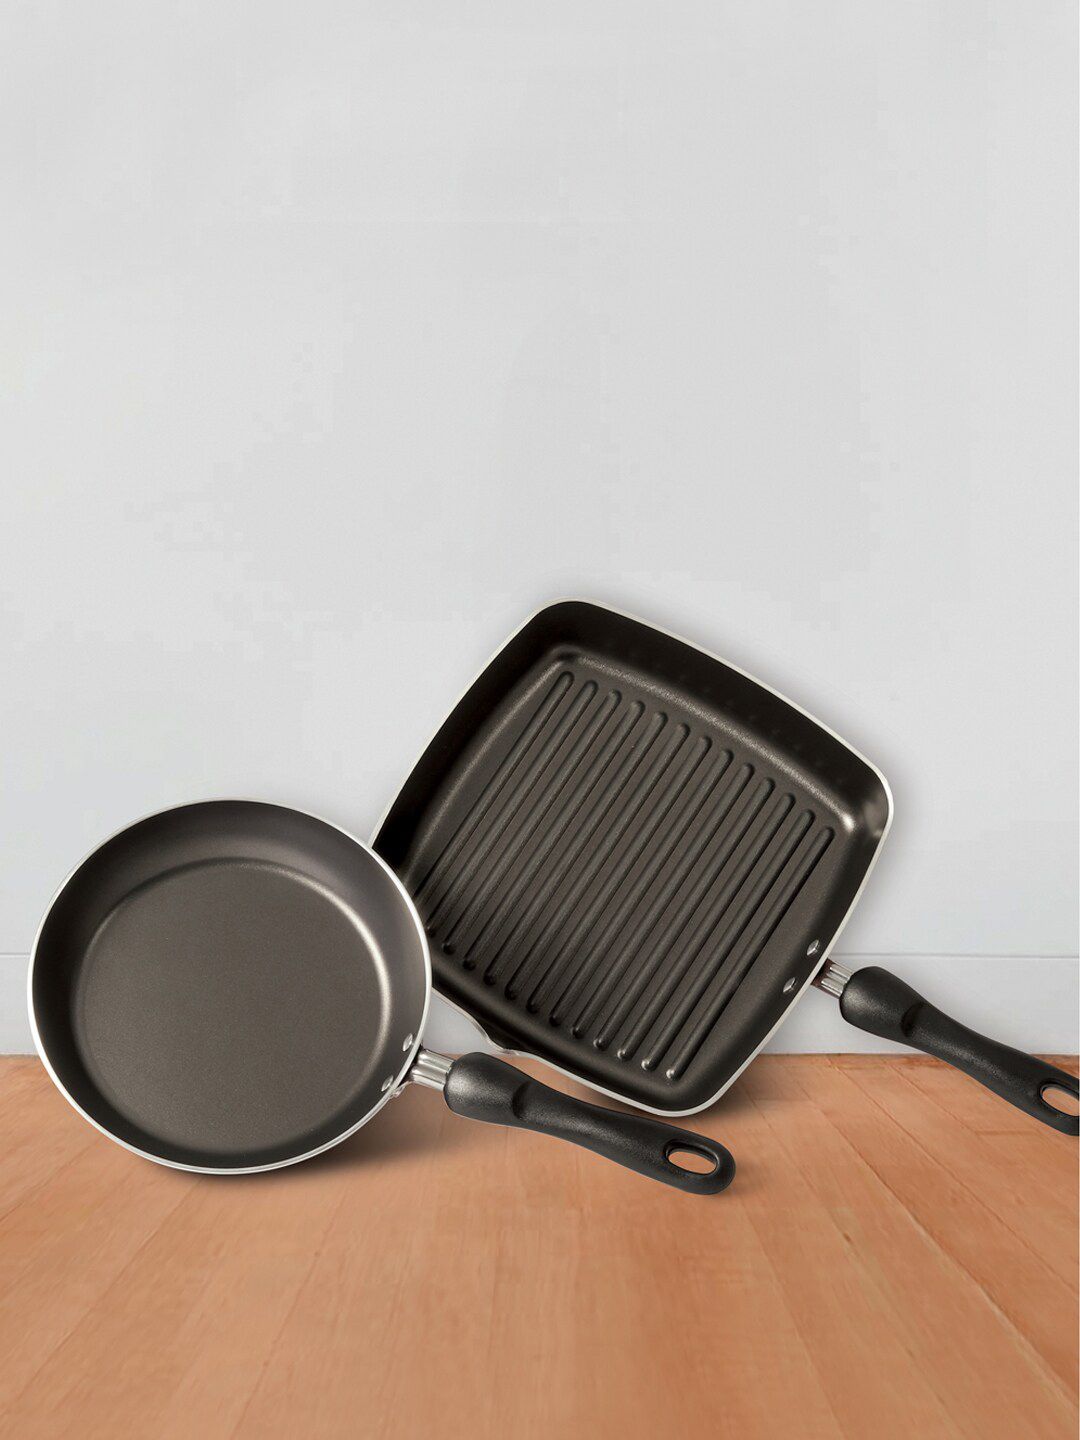 MEYER 2 Pcs Gold-Toned Non-Stick Frypan & Grillpan Gas & Electric Cooktops Cookware Set Price in India